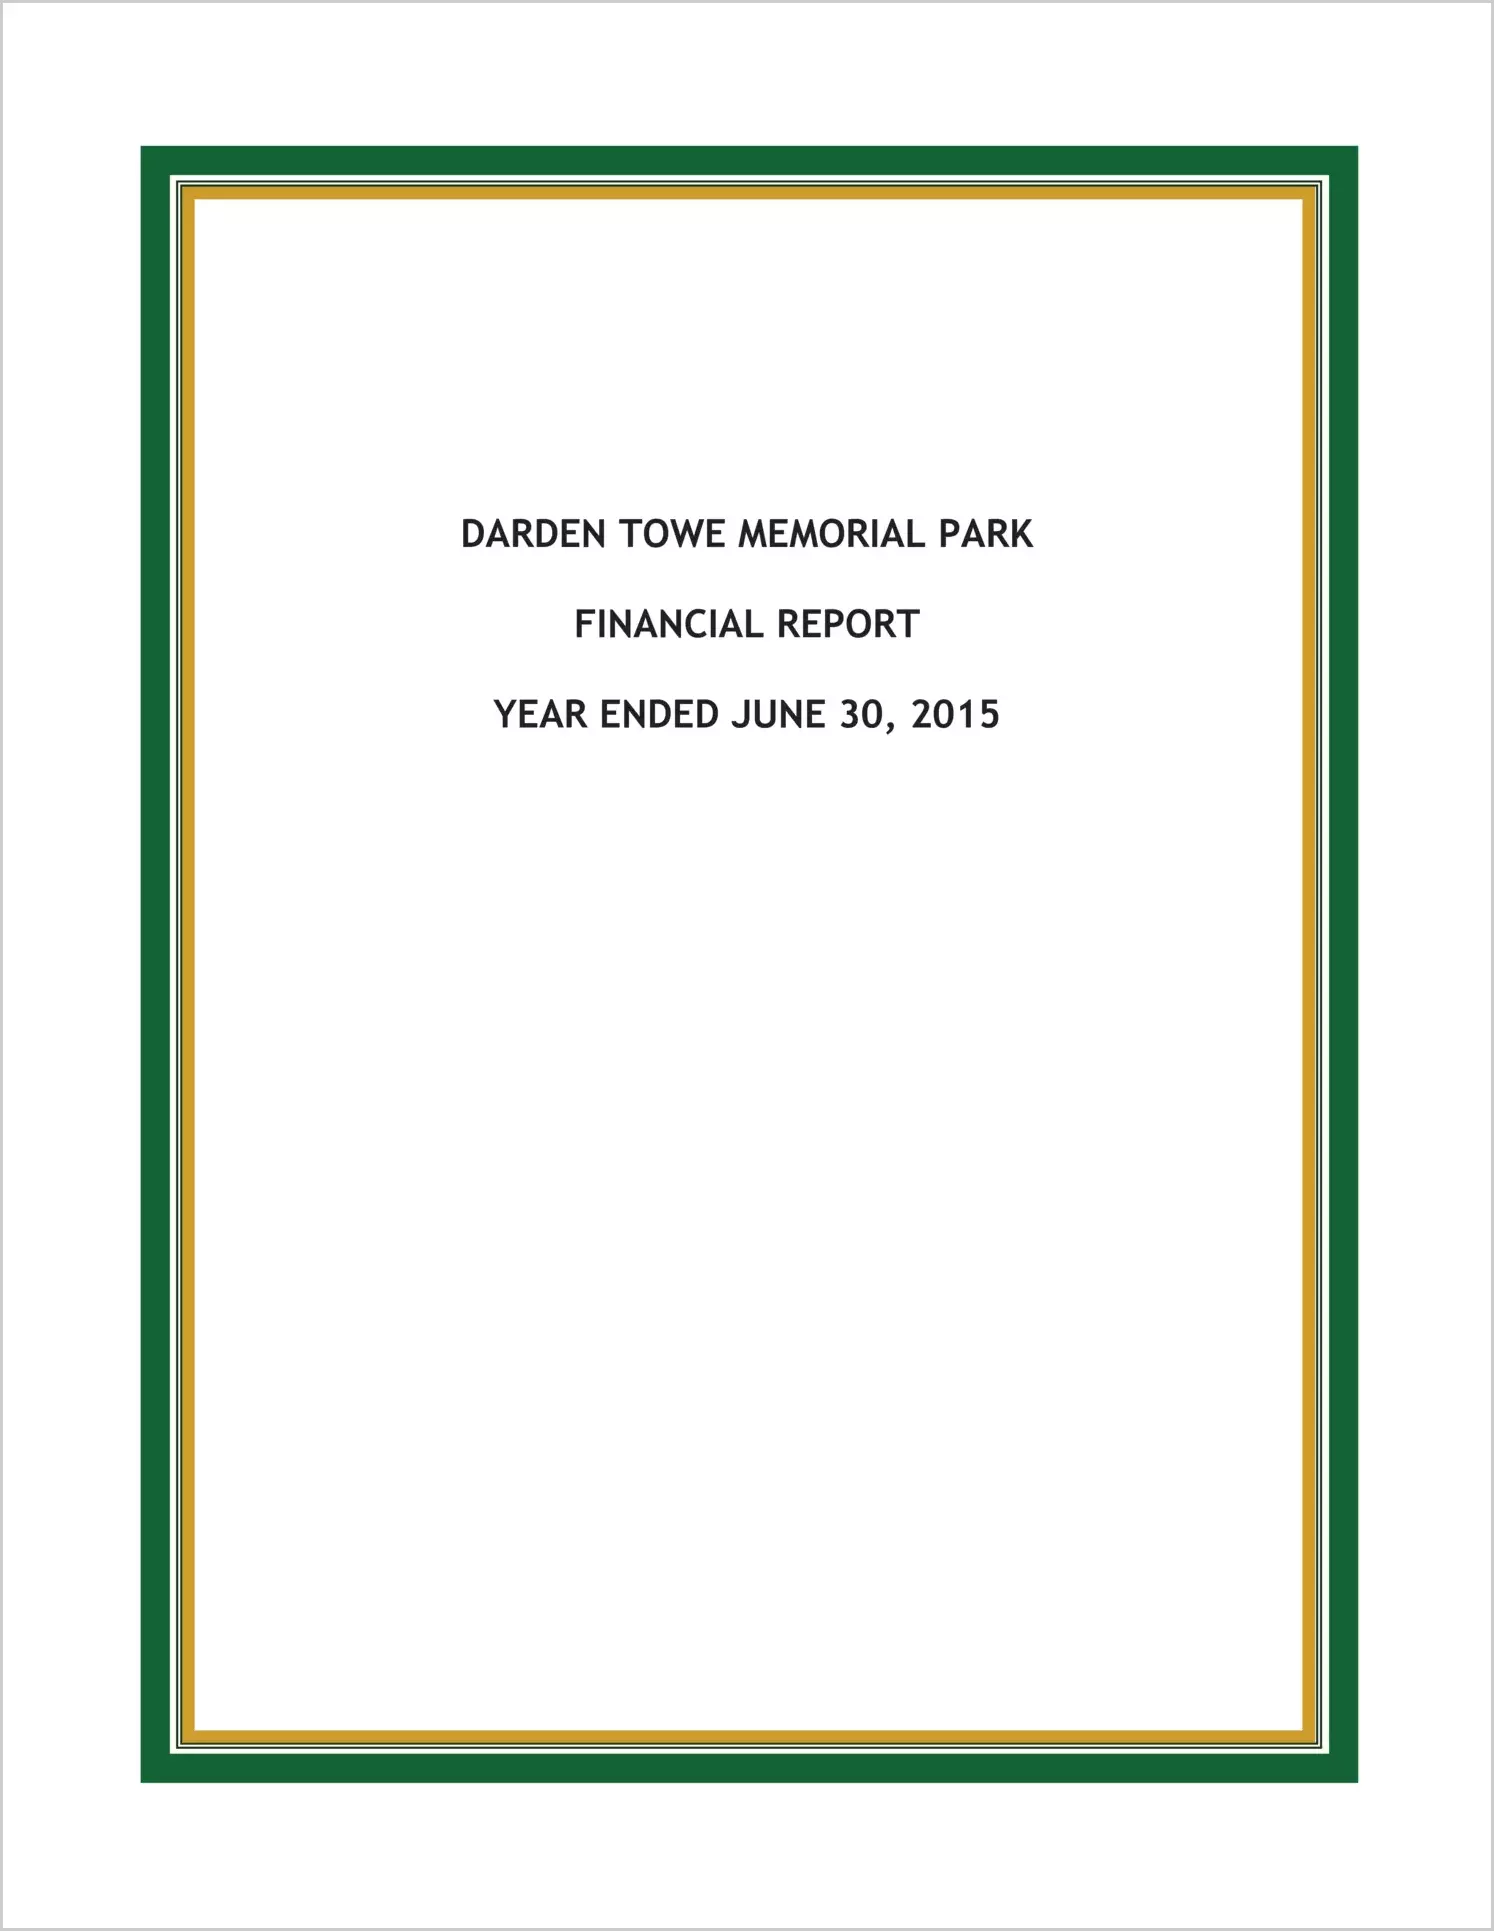 2015 ABC/Other Annual Financial Report  for Darden Towe Memorial Park